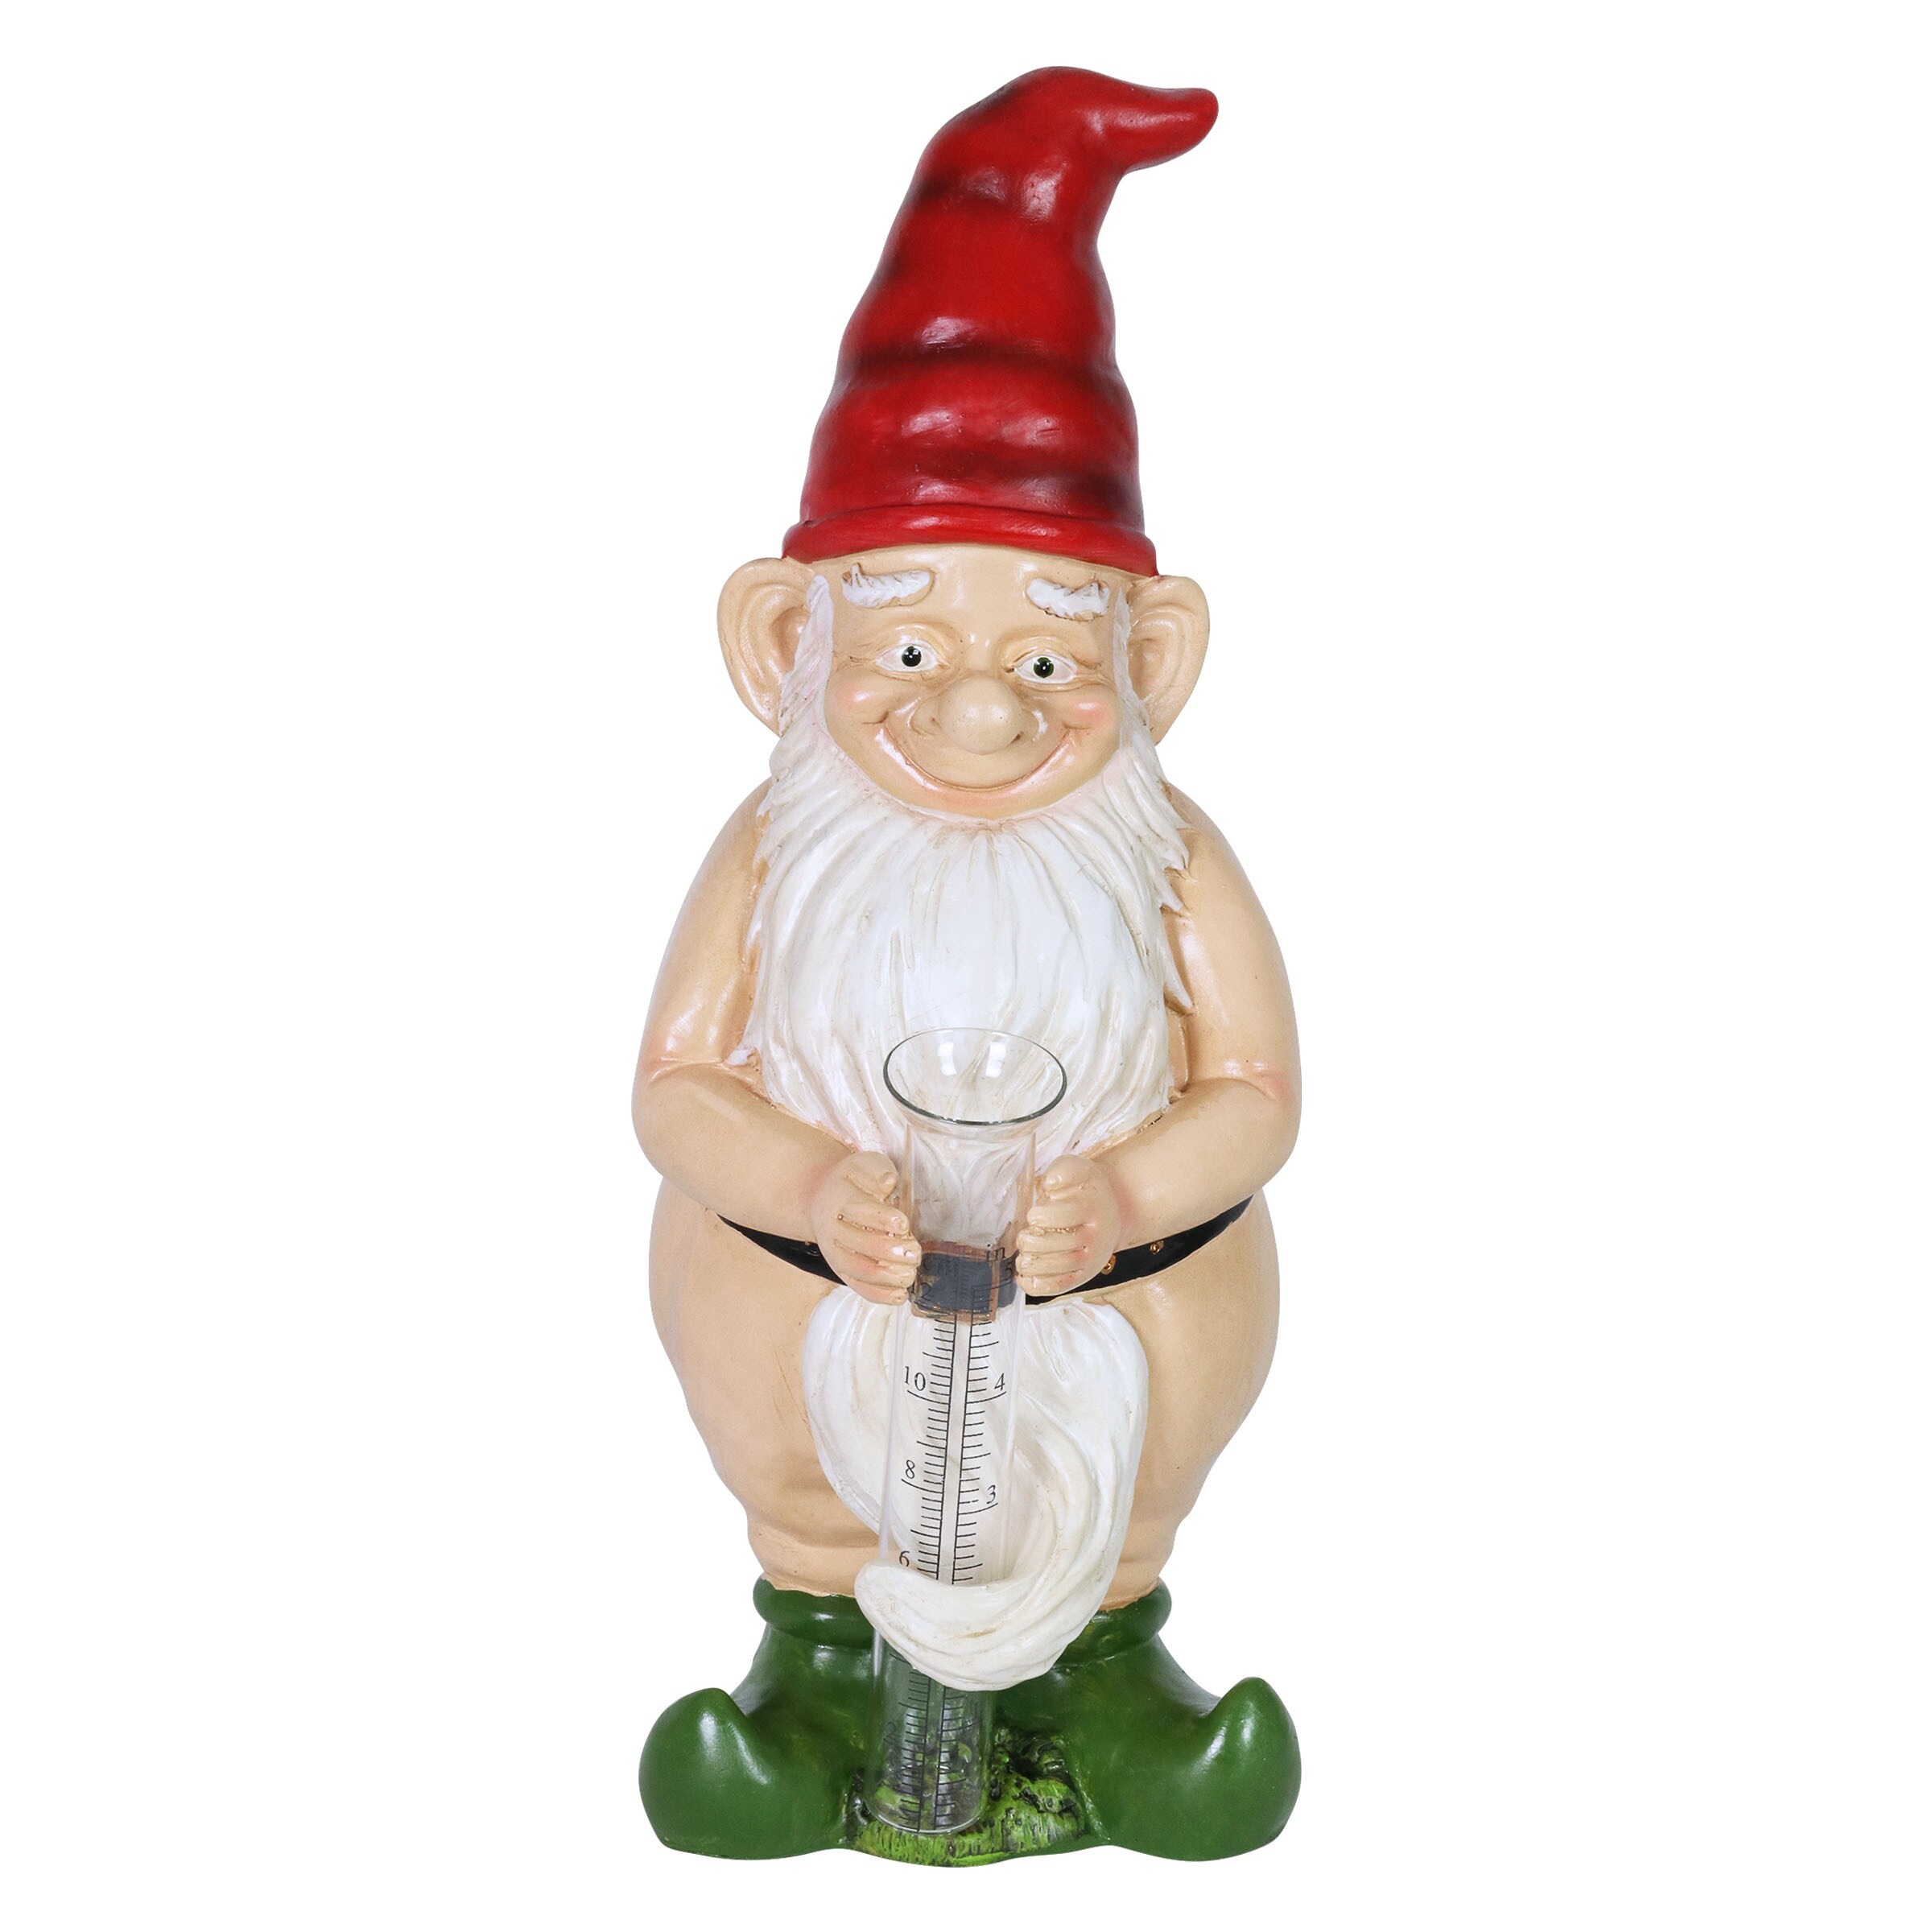 https://ak1.ostkcdn.com/images/products/is/images/direct/9e04796ed2e3cd89dcb2bb3dae53978fb660a351/Exhart-Good-Time-Naked-Rain-Gauge-Randy-Gnome%2C-6-by-14-Inches.jpg